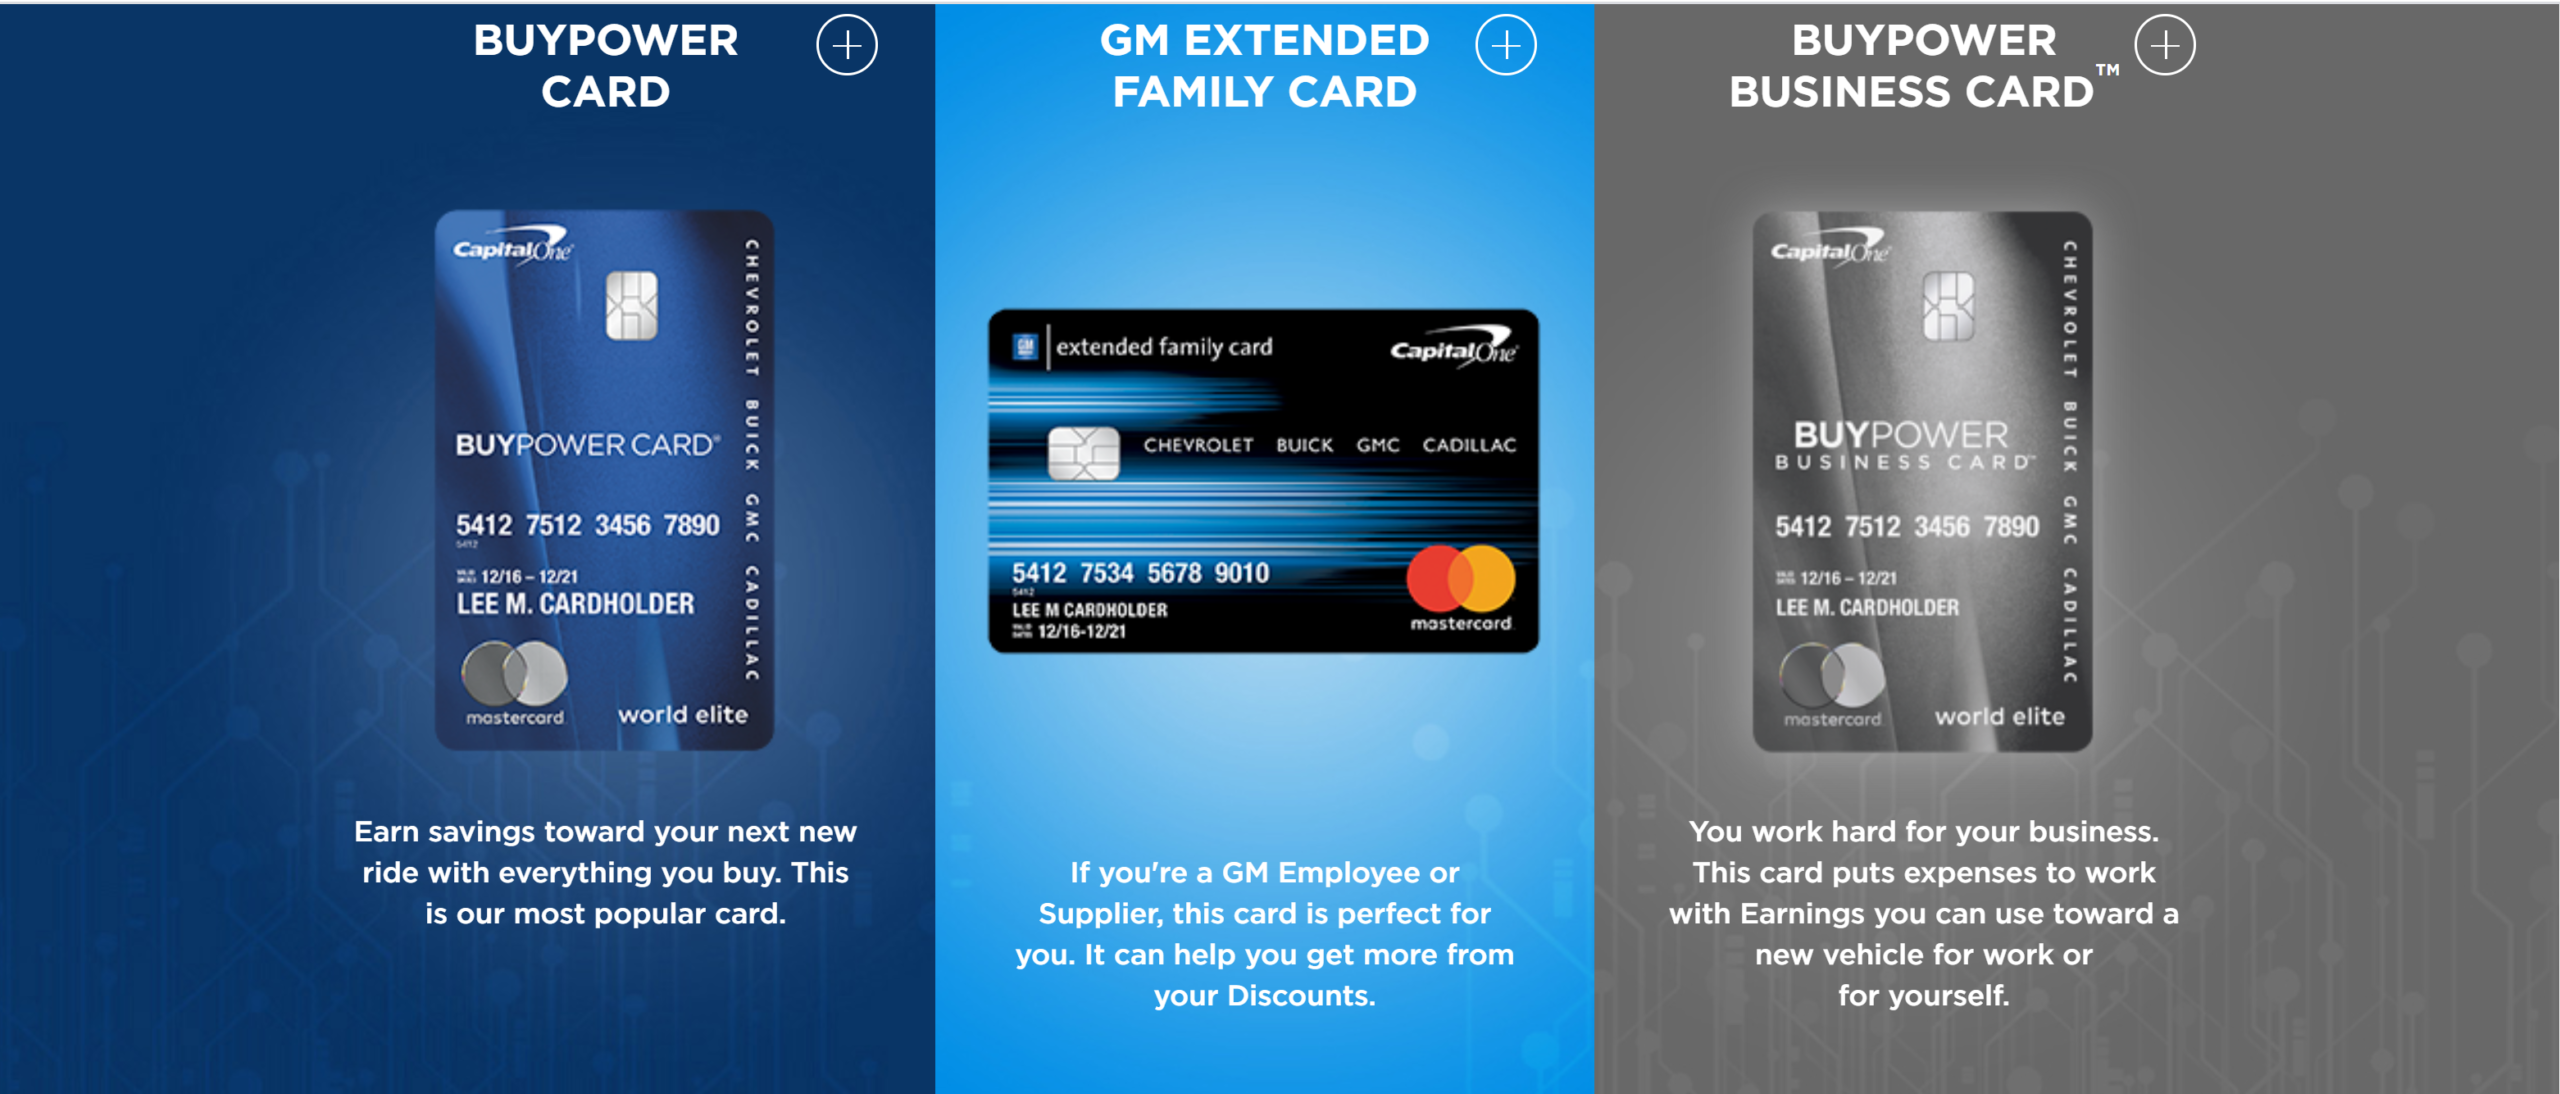 Buy Power Card - Features of the Capital One Buy Power Card